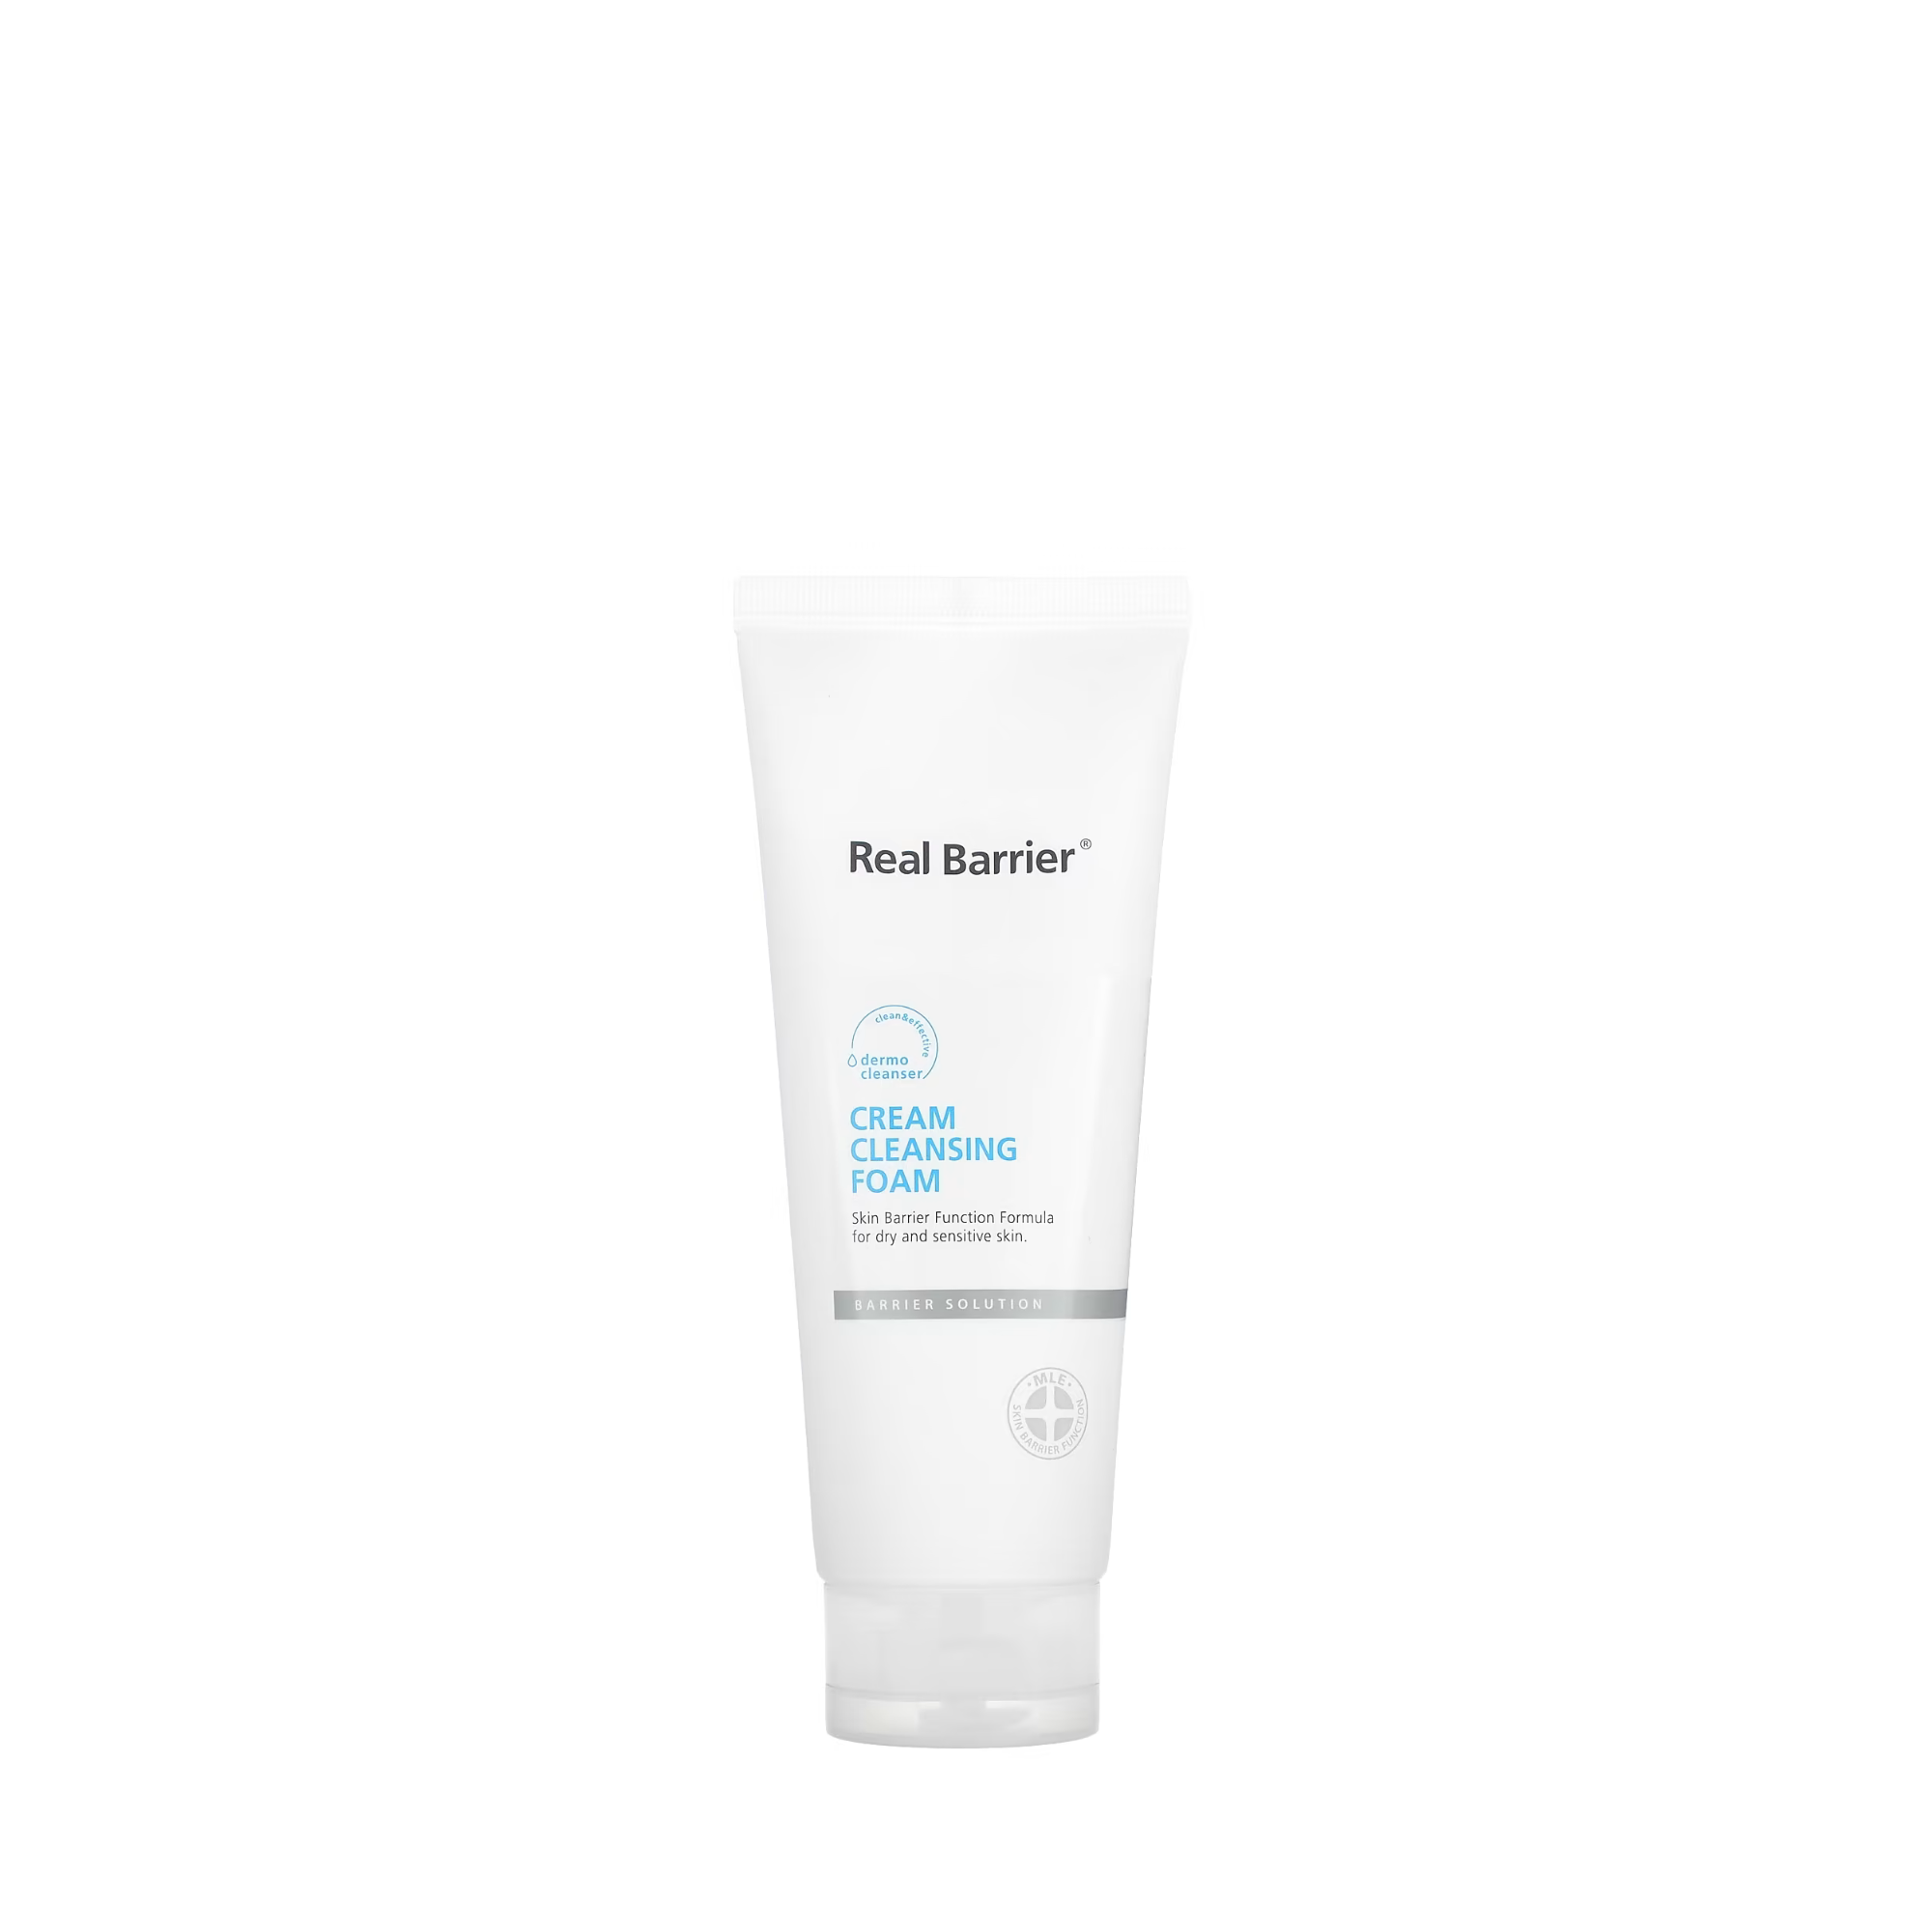 Cream cleansing foam by Real Barrier (Real Barrier Cream Cleansing Foam)